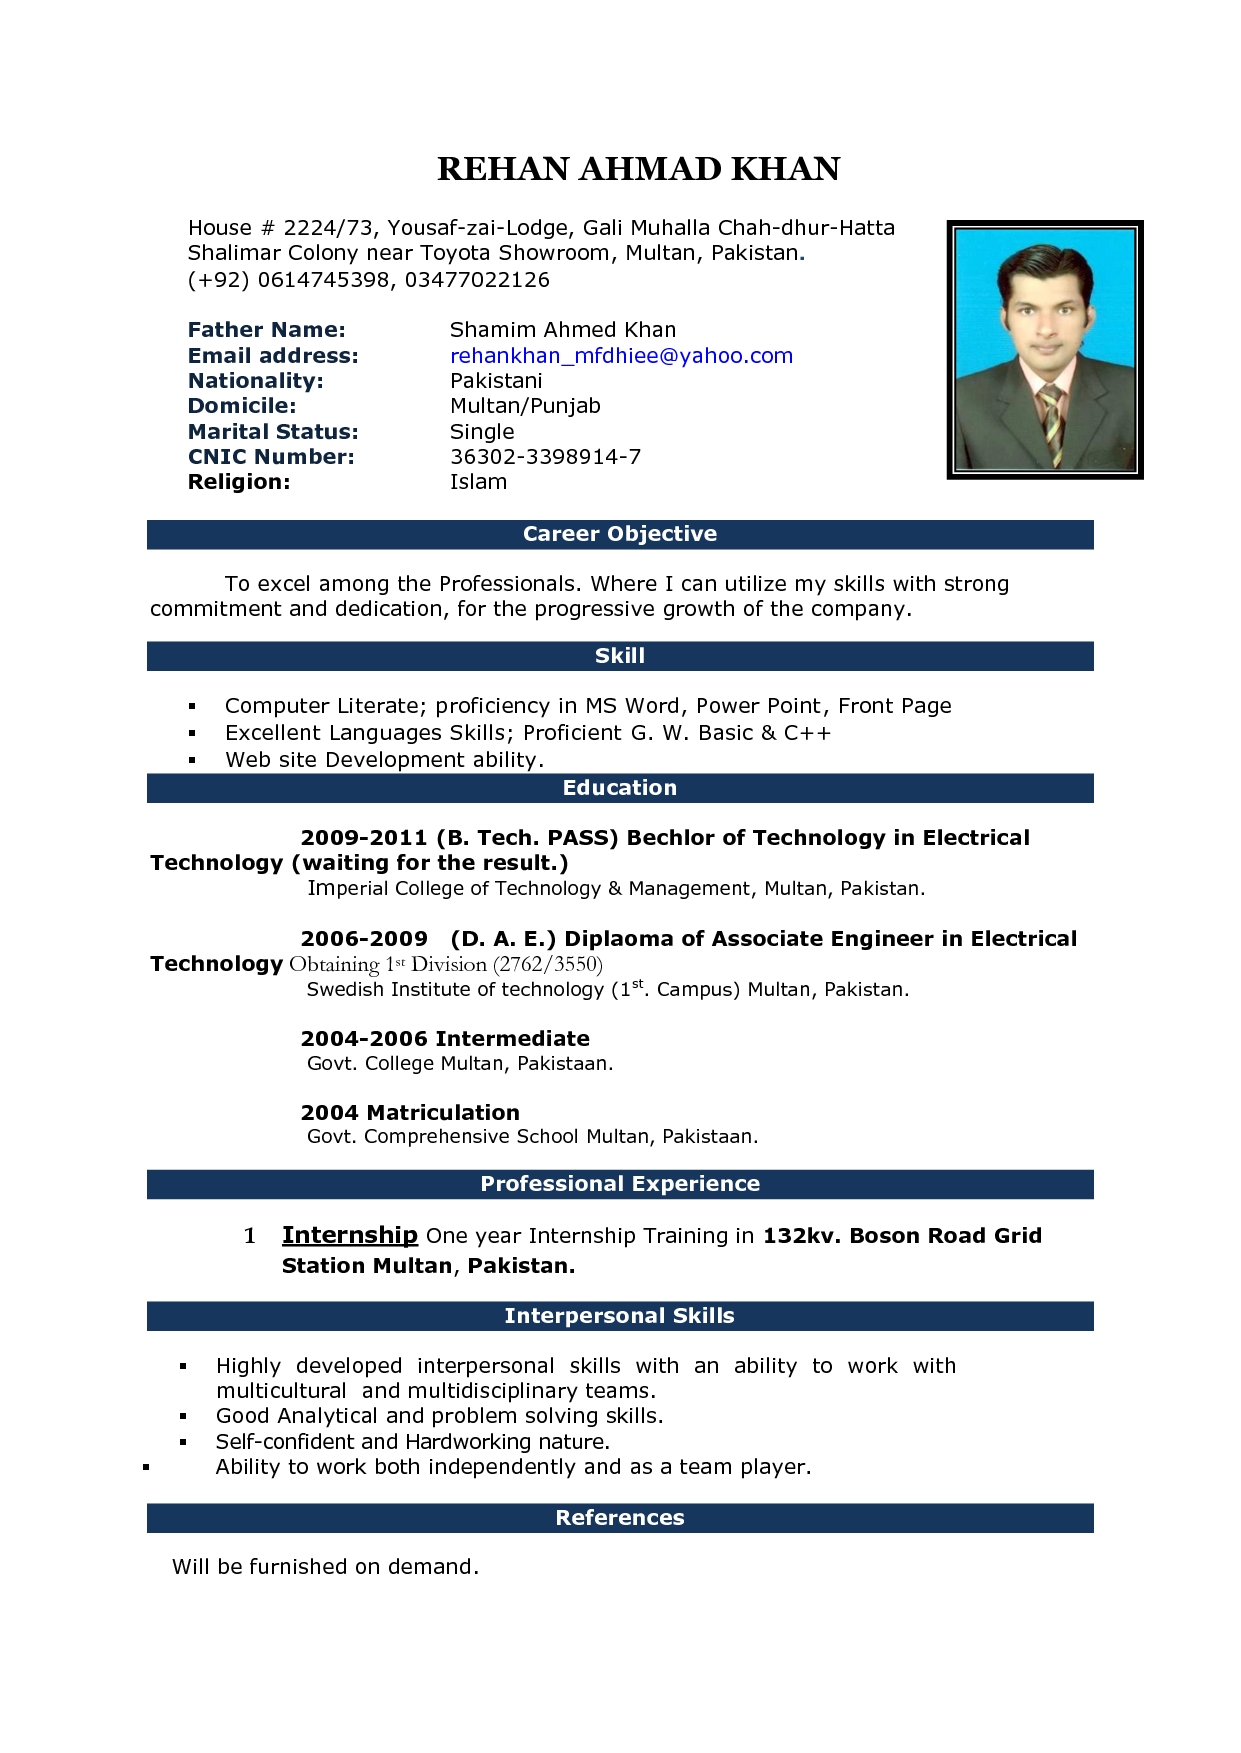 Free Resume Templates Microsoft Word Resume Format Download In Ms Word Floating City Org First Jobplate Microsoft Ashlee Club Tplates Free Buy Premium Professional free resume templates microsoft word|wikiresume.com